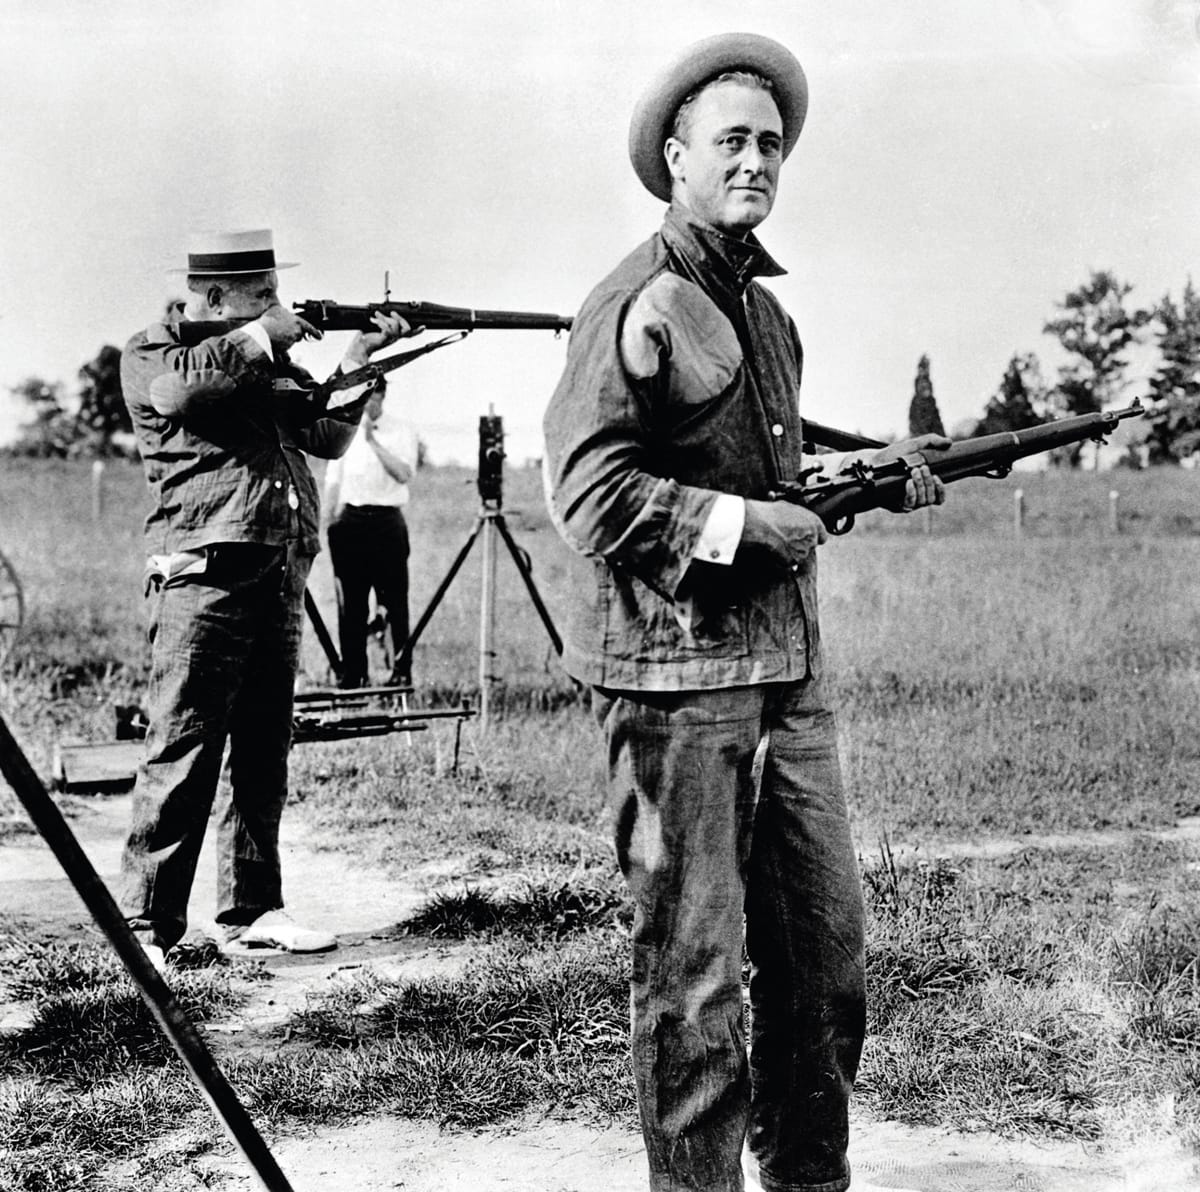 Franklin Roosevelt, Assistant Secretary of the Navy, on a rifle range at Indian Point, c.1916